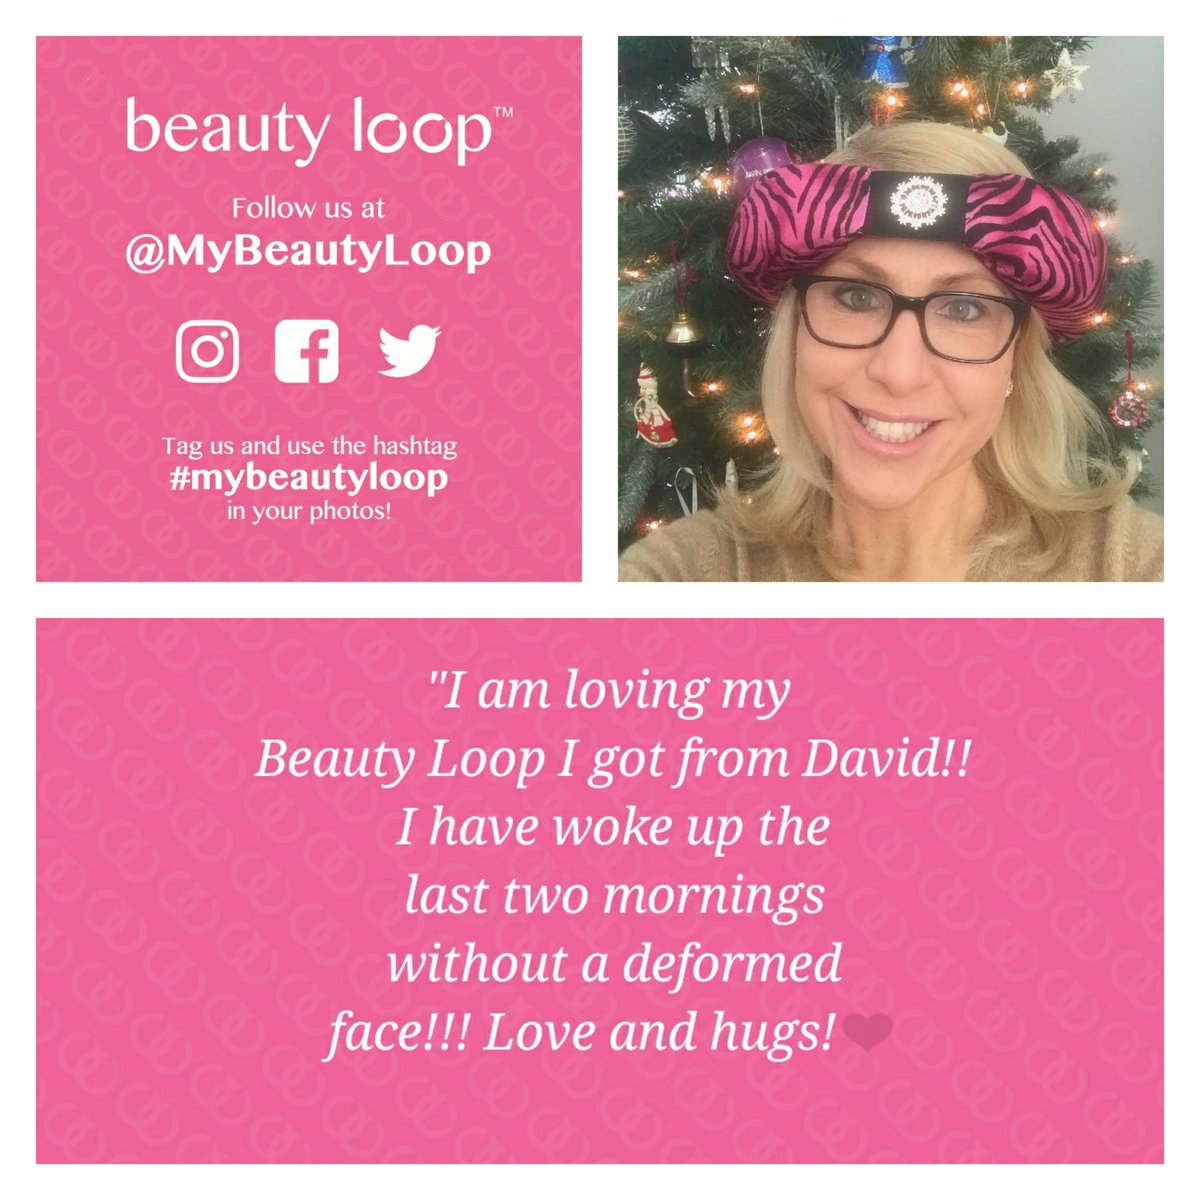 Thank you for sharing your beautiful photo and kind words about #MyBeautyLoop. #antiagingpillow #antiaging #beautysleep #beautyblogger  #beautymust #facelift #skincare #antiwrinkle #antiwrinklepillow #beautyloop #protectyourface